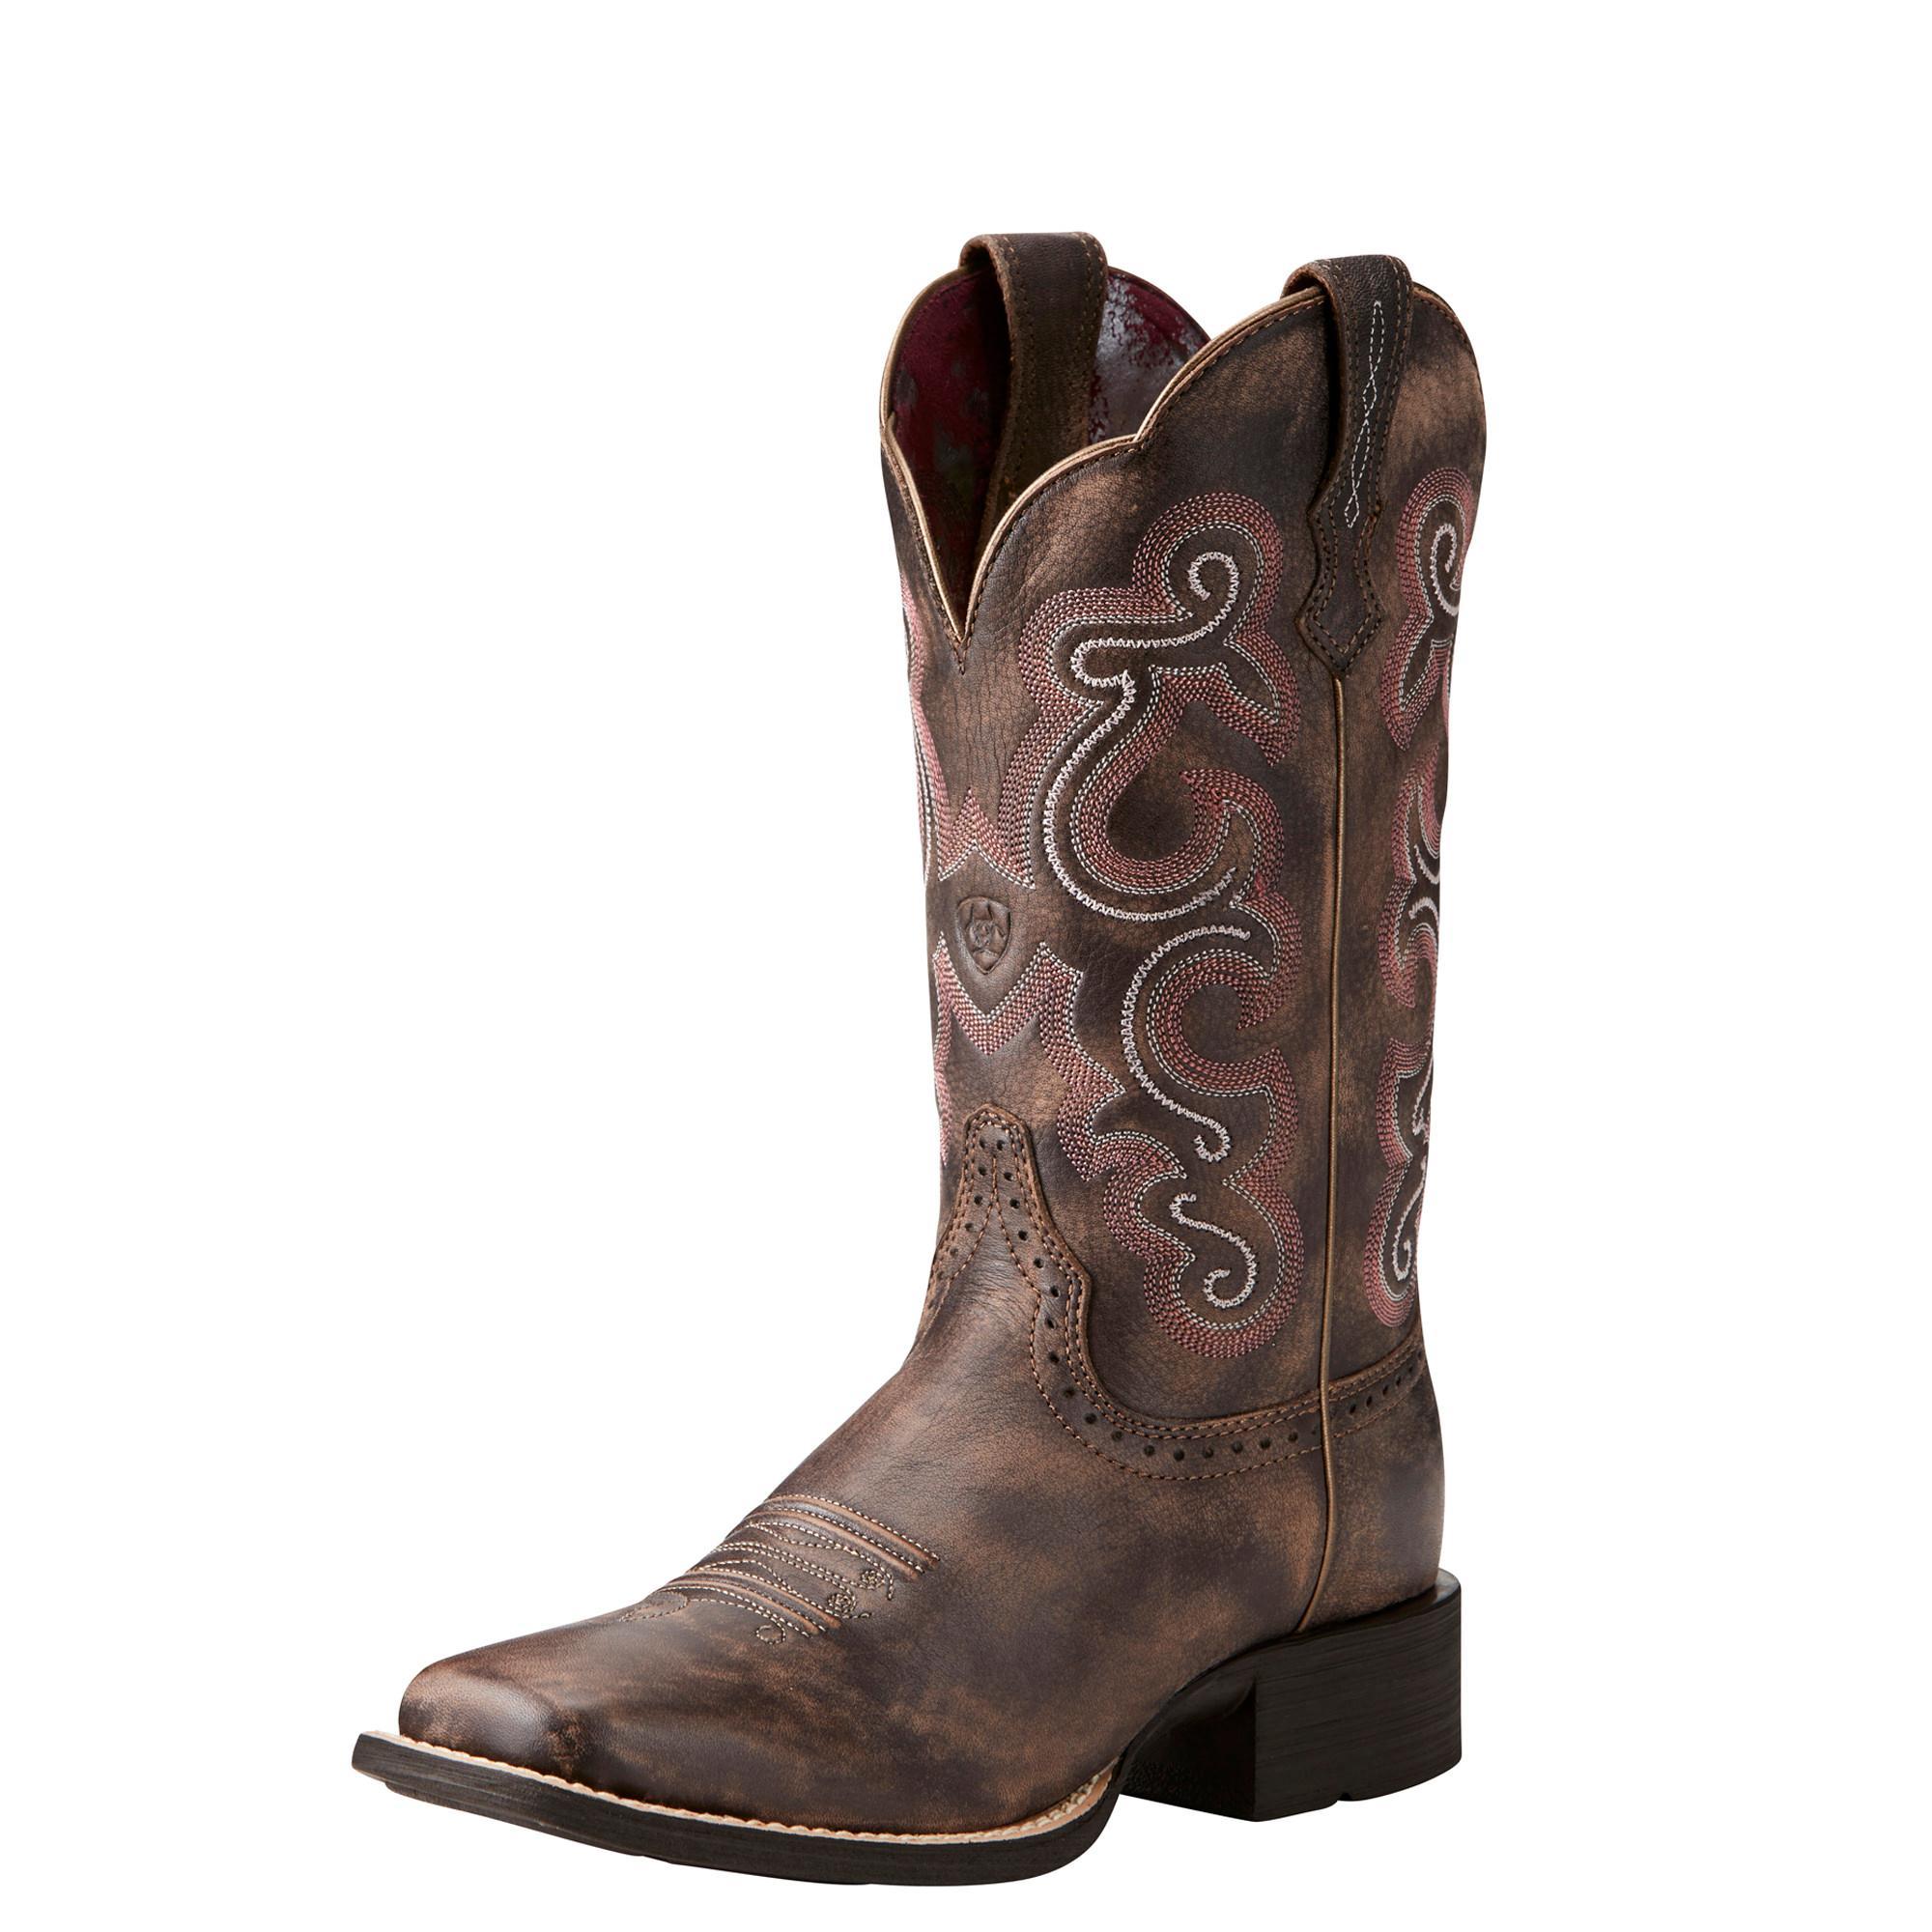 Ariat Women's Quickdraw Western Boots Product Image